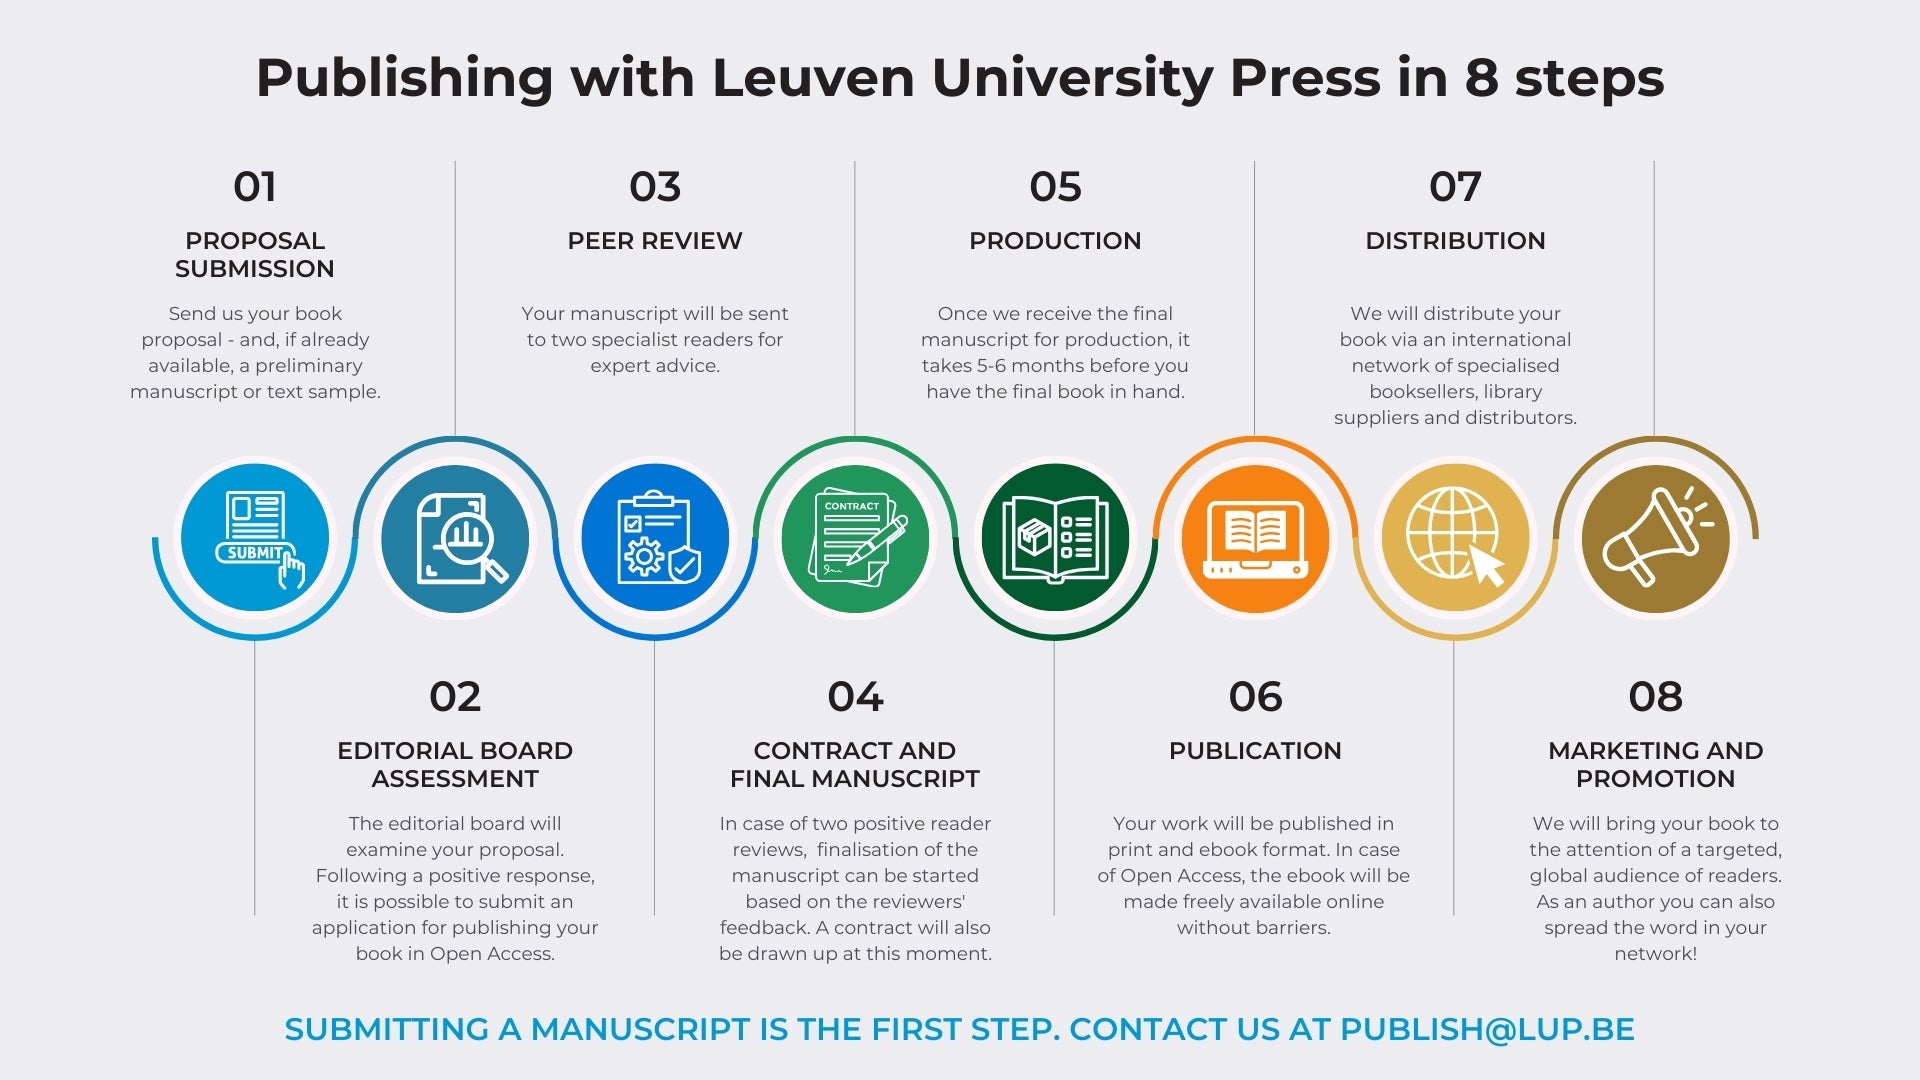 Publishing with Leuven University Press in 8 steps